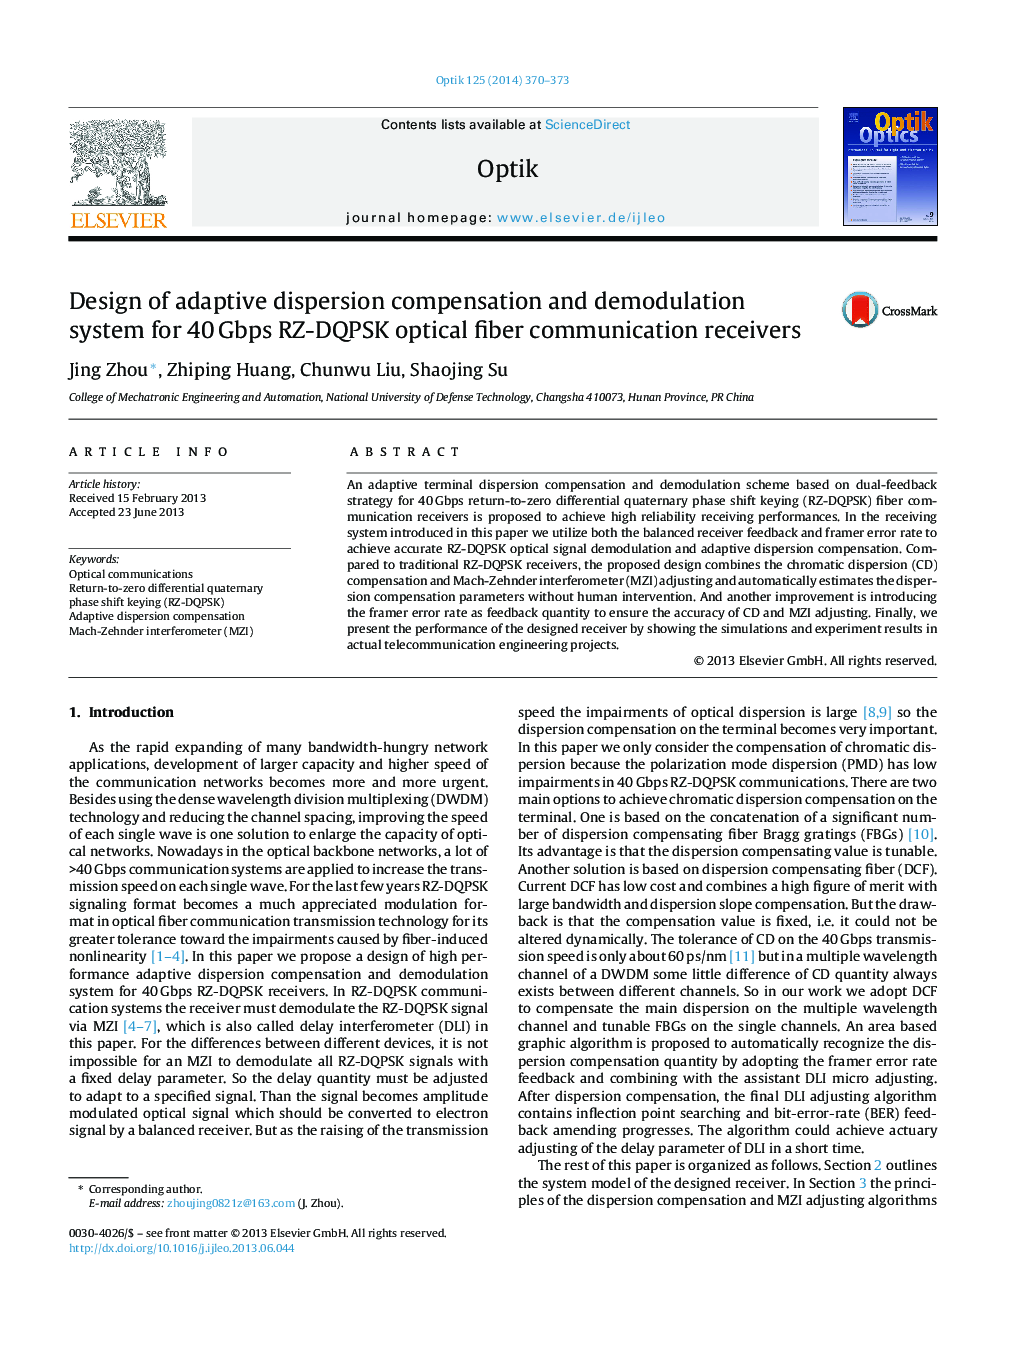 Design of adaptive dispersion compensation and demodulation system for 40 Gbps RZ-DQPSK optical fiber communication receivers